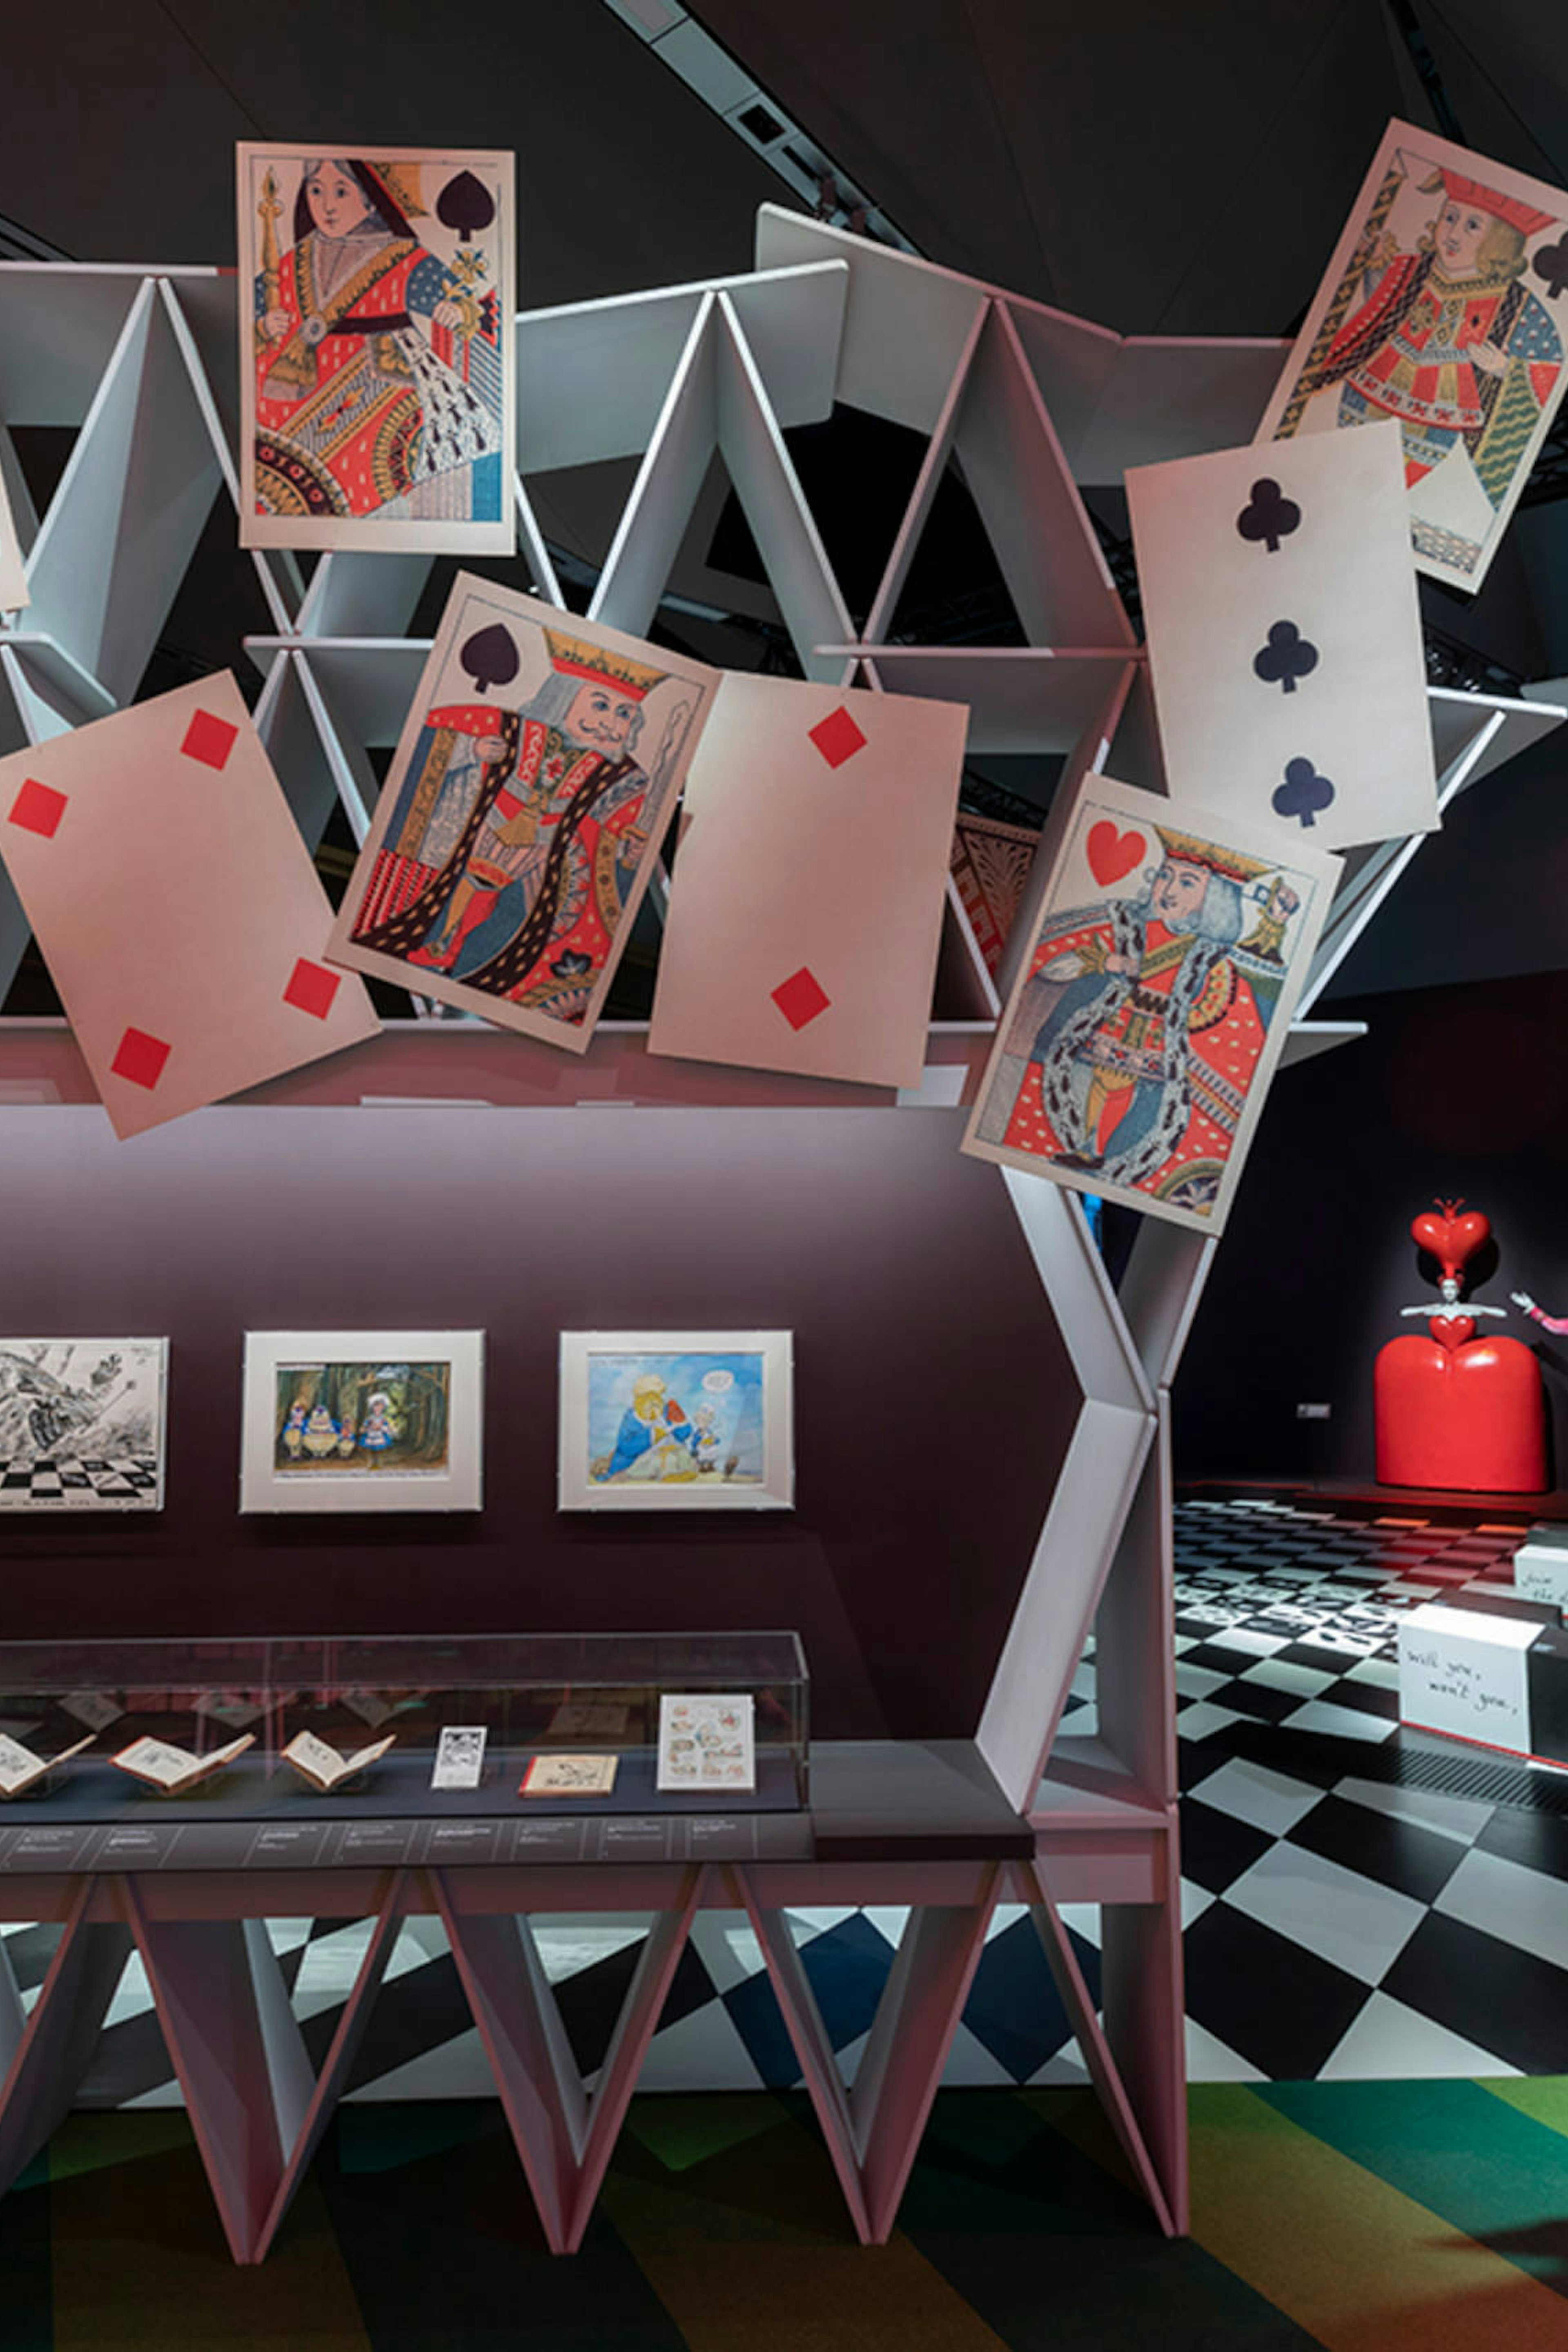 A Journey Through the Looking Glass: A Review of The V&A Exhibition ‘Alice: Curiouser and Curiouser’